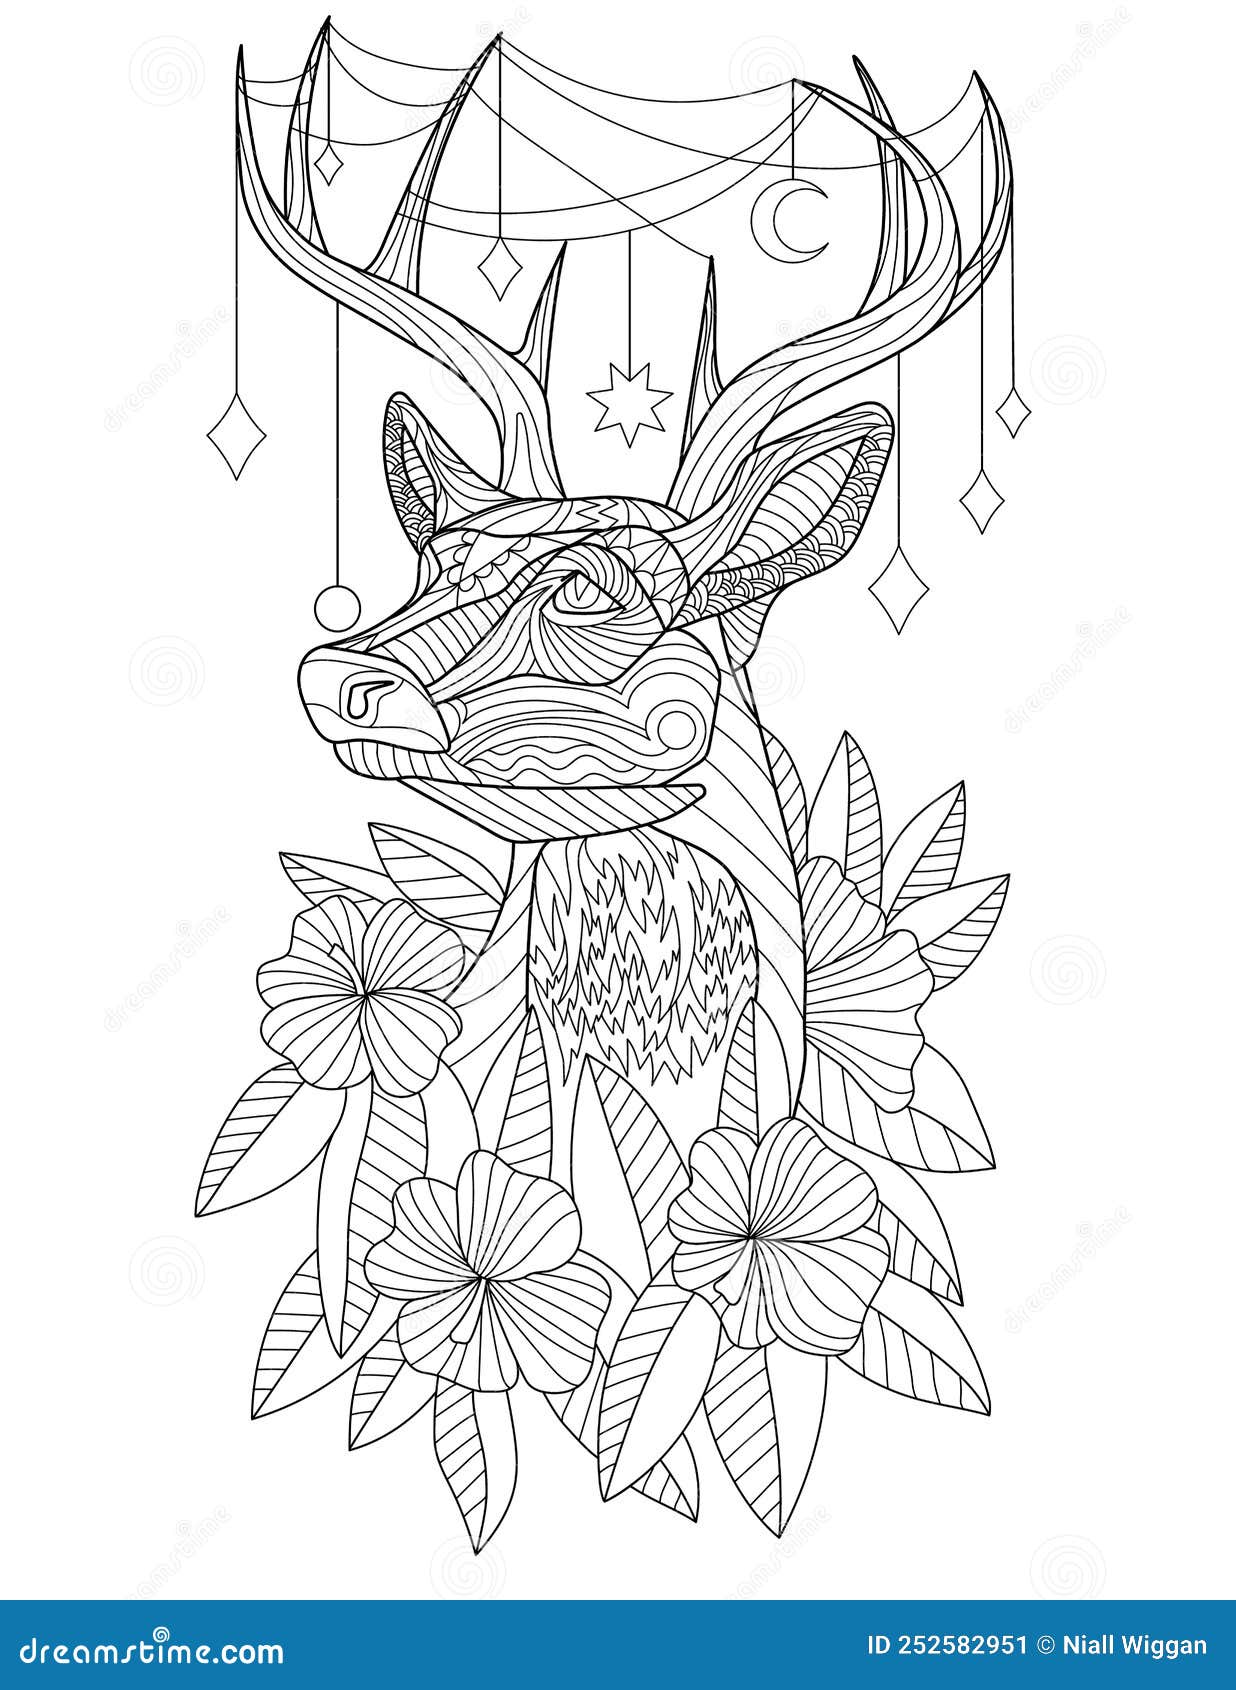 Coloring page with detailed deer with different decorations on horns and flowers around sheet to be colored with elk stock vector